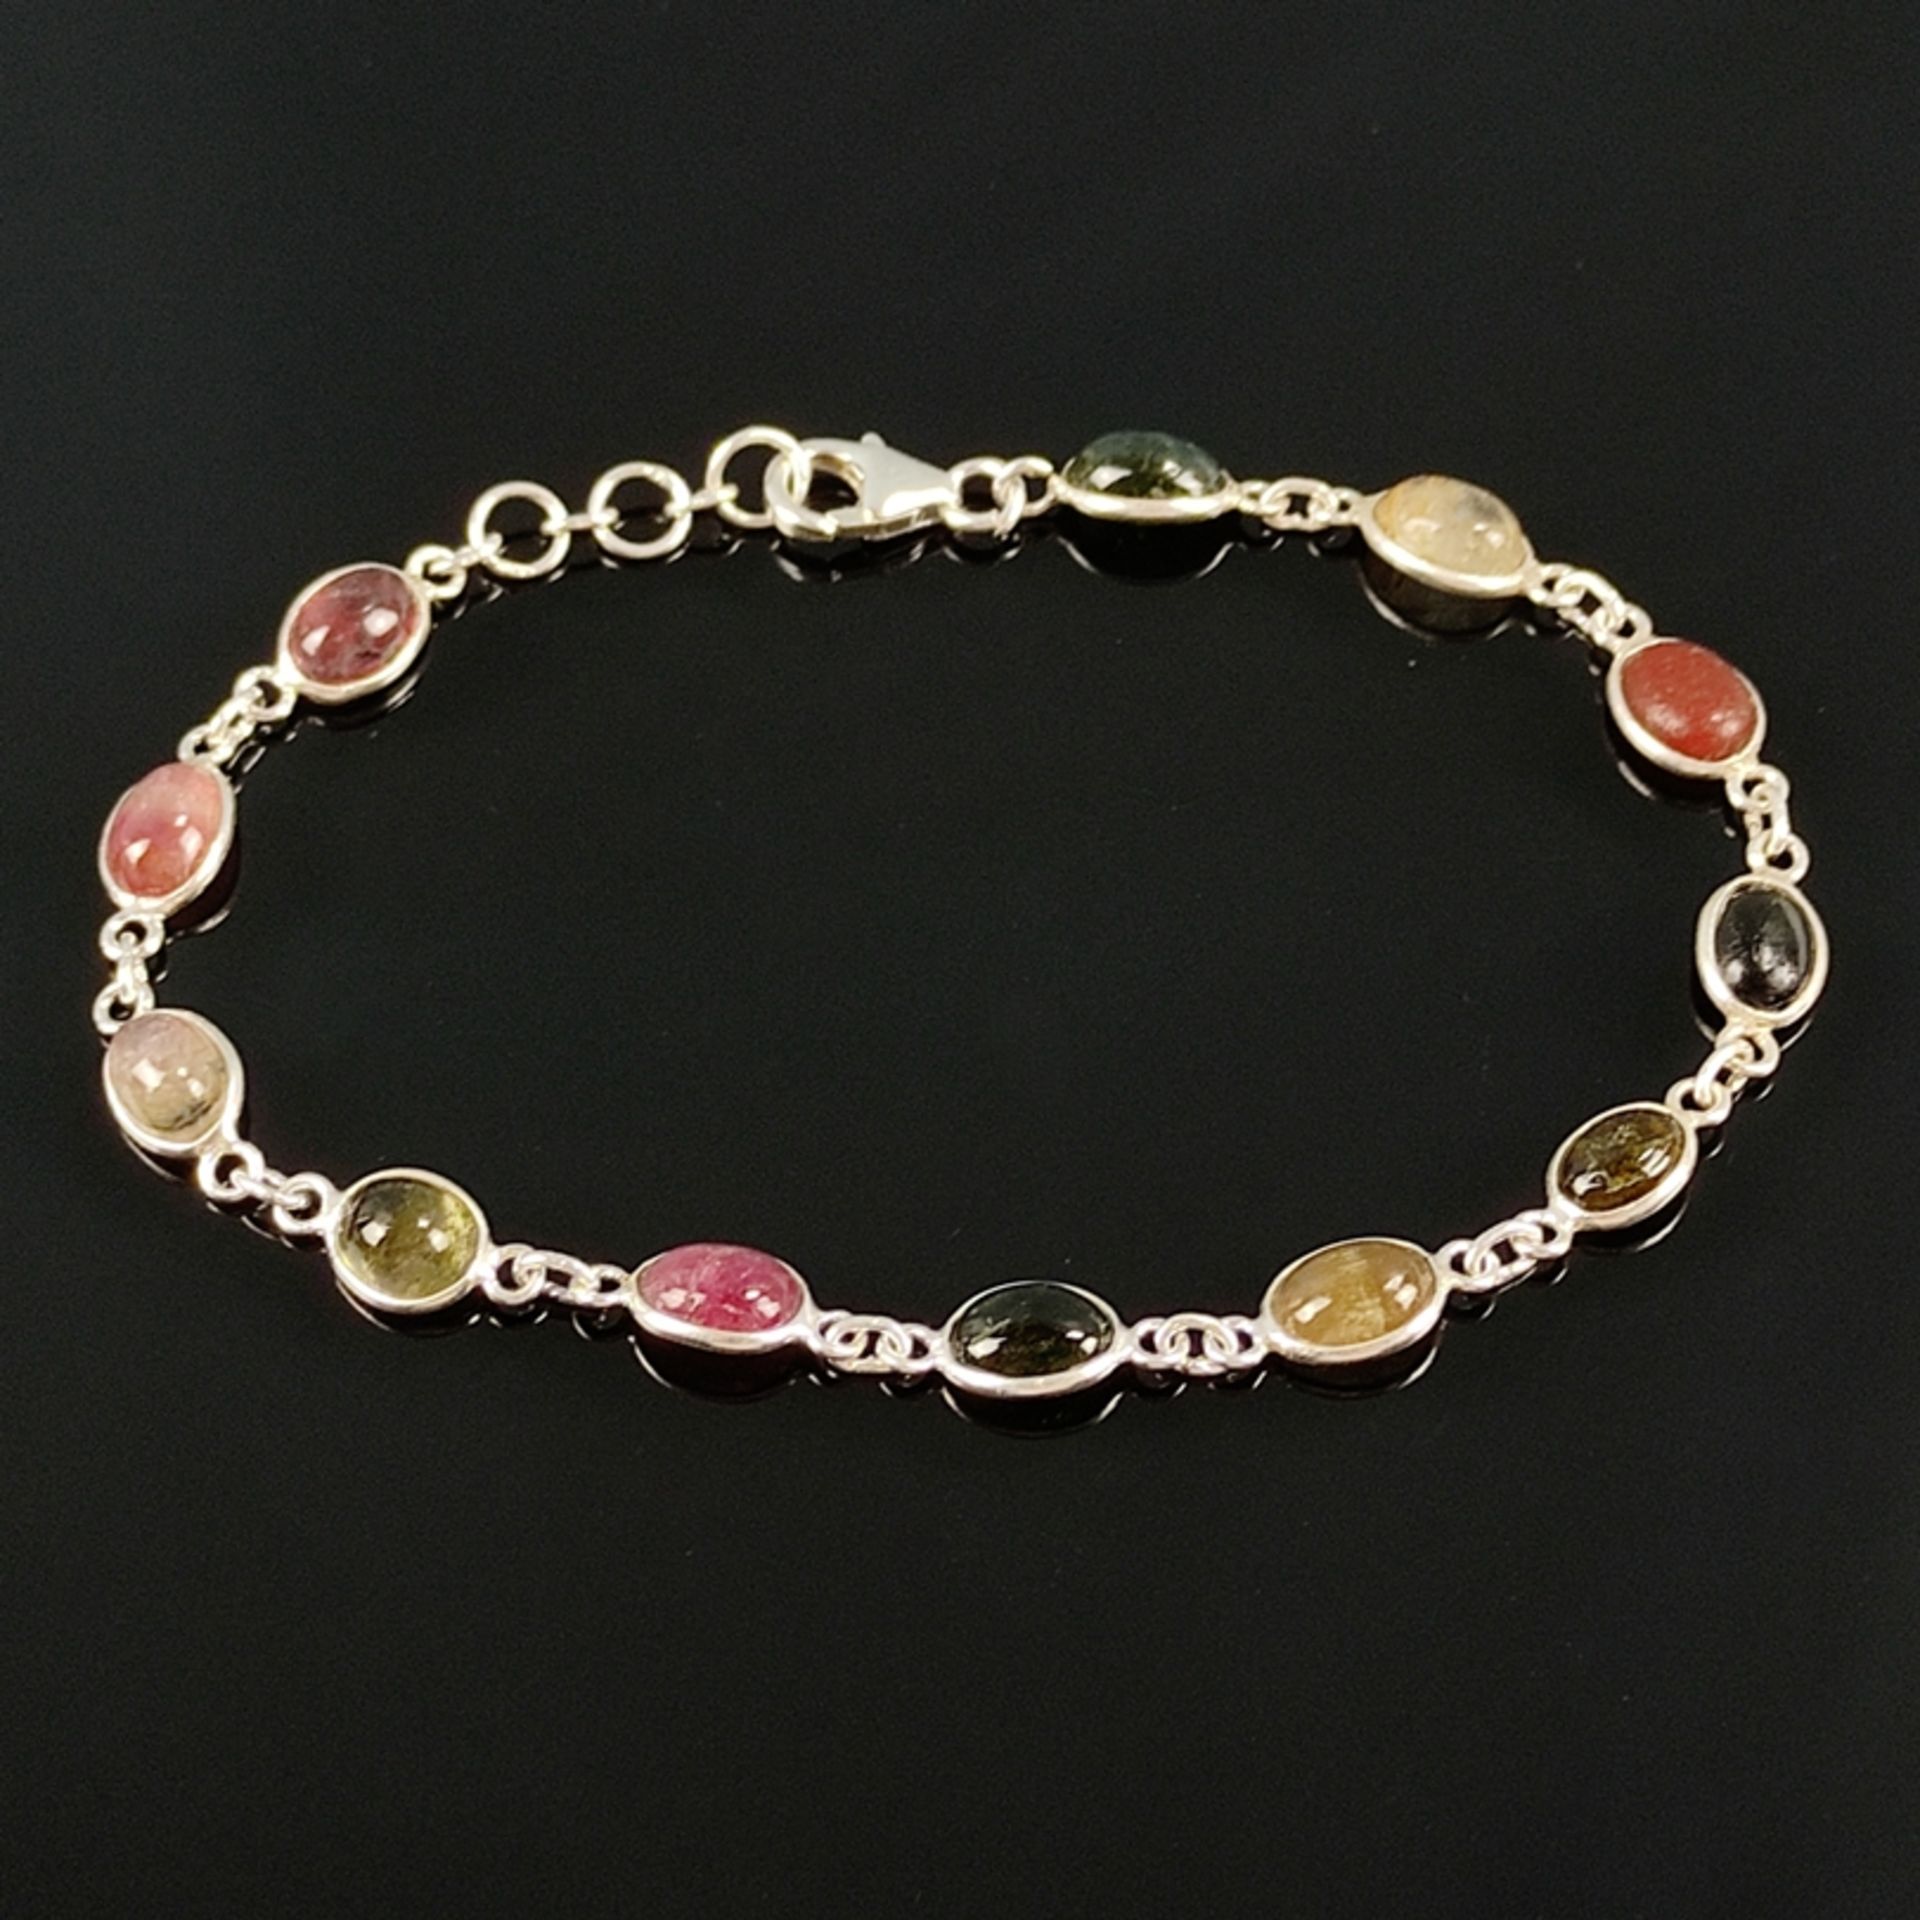 Multicolor tourmaline bracelet, silver 925, 6g, studded with 12 oval different colored natural tour - Image 2 of 3